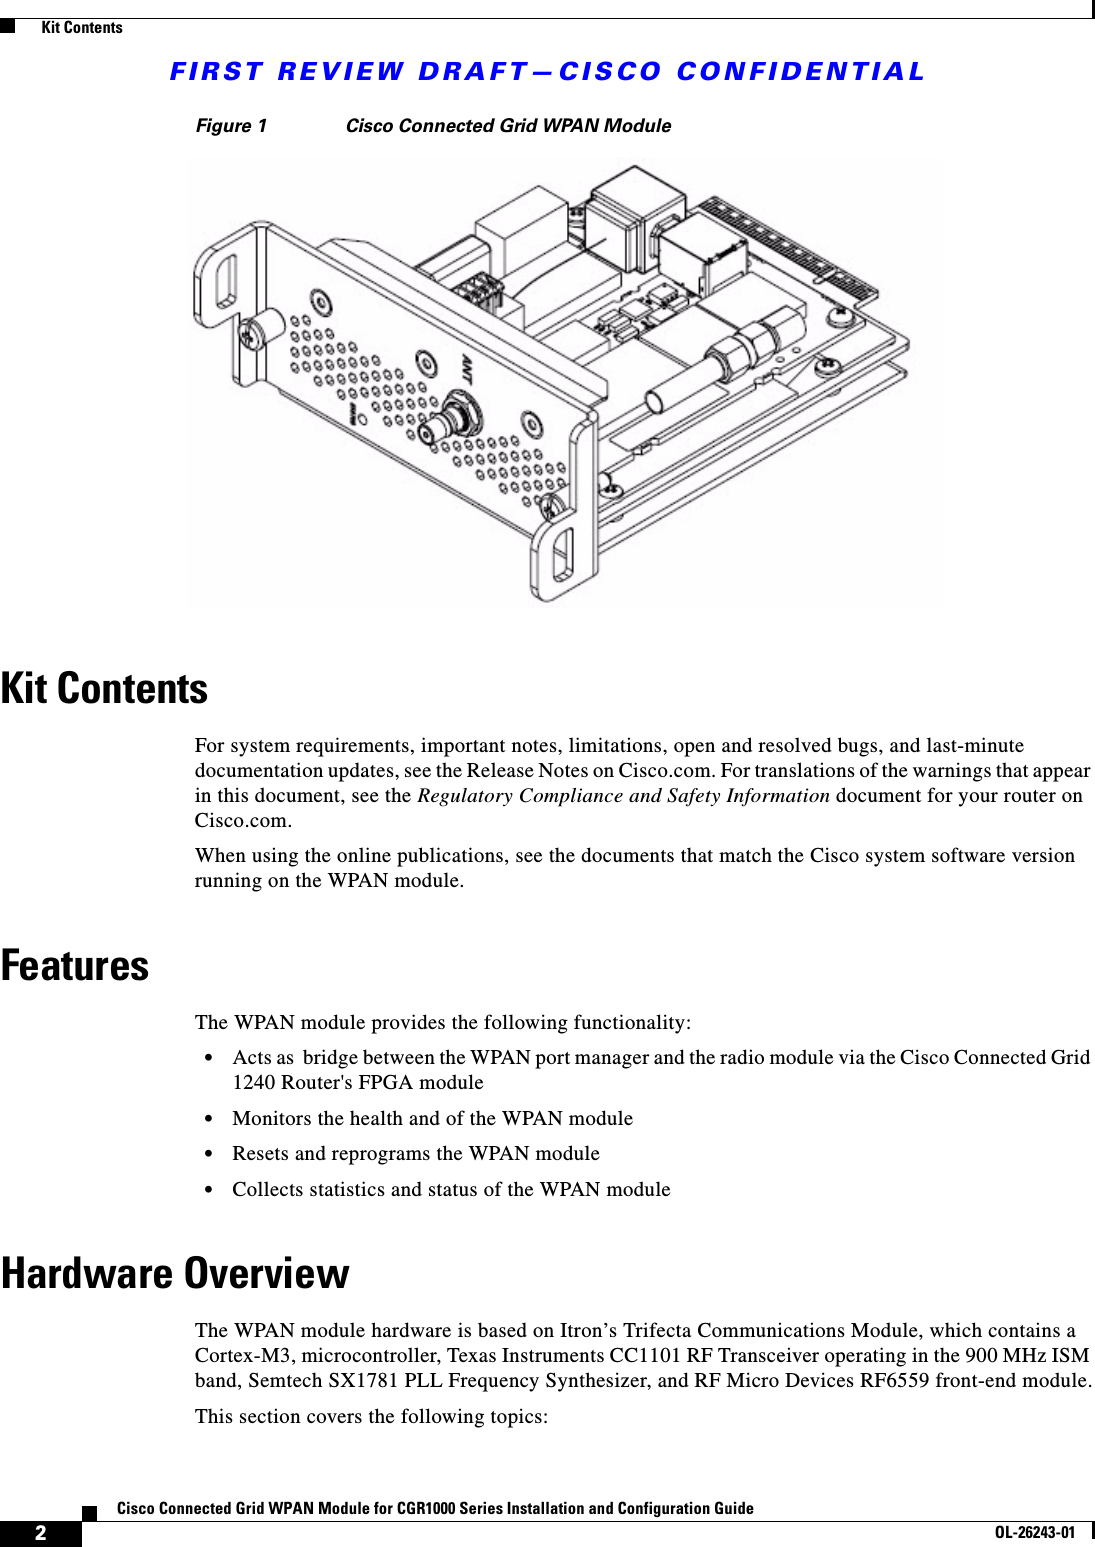 FIRST REVIEW DRAFT—CISCO CONFIDENTIAL2Cisco Connected Grid WPAN Module for CGR1000 Series Installation and Configuration GuideOL-26243-01  Kit ContentsFigure 1 Cisco Connected Grid WPAN ModuleKit ContentsFor system requirements, important notes, limitations, open and resolved bugs, and last-minute documentation updates, see the Release Notes on Cisco.com. For translations of the warnings that appear in this document, see the Regulatory Compliance and Safety Information document for your router on Cisco.com.When using the online publications, see the documents that match the Cisco system software version running on the WPAN module.FeaturesThe WPAN module provides the following functionality:  • Acts as  bridge between the WPAN port manager and the radio module via the Cisco Connected Grid 1240 Router&apos;s FPGA module  • Monitors the health and of the WPAN module  • Resets and reprograms the WPAN module  • Collects statistics and status of the WPAN moduleHardware OverviewThe WPAN module hardware is based on Itron’s Trifecta Communications Module, which contains a Cortex-M3, microcontroller, Texas Instruments CC1101 RF Transceiver operating in the 900 MHz ISM band, Semtech SX1781 PLL Frequency Synthesizer, and RF Micro Devices RF6559 front-end module.This section covers the following topics: